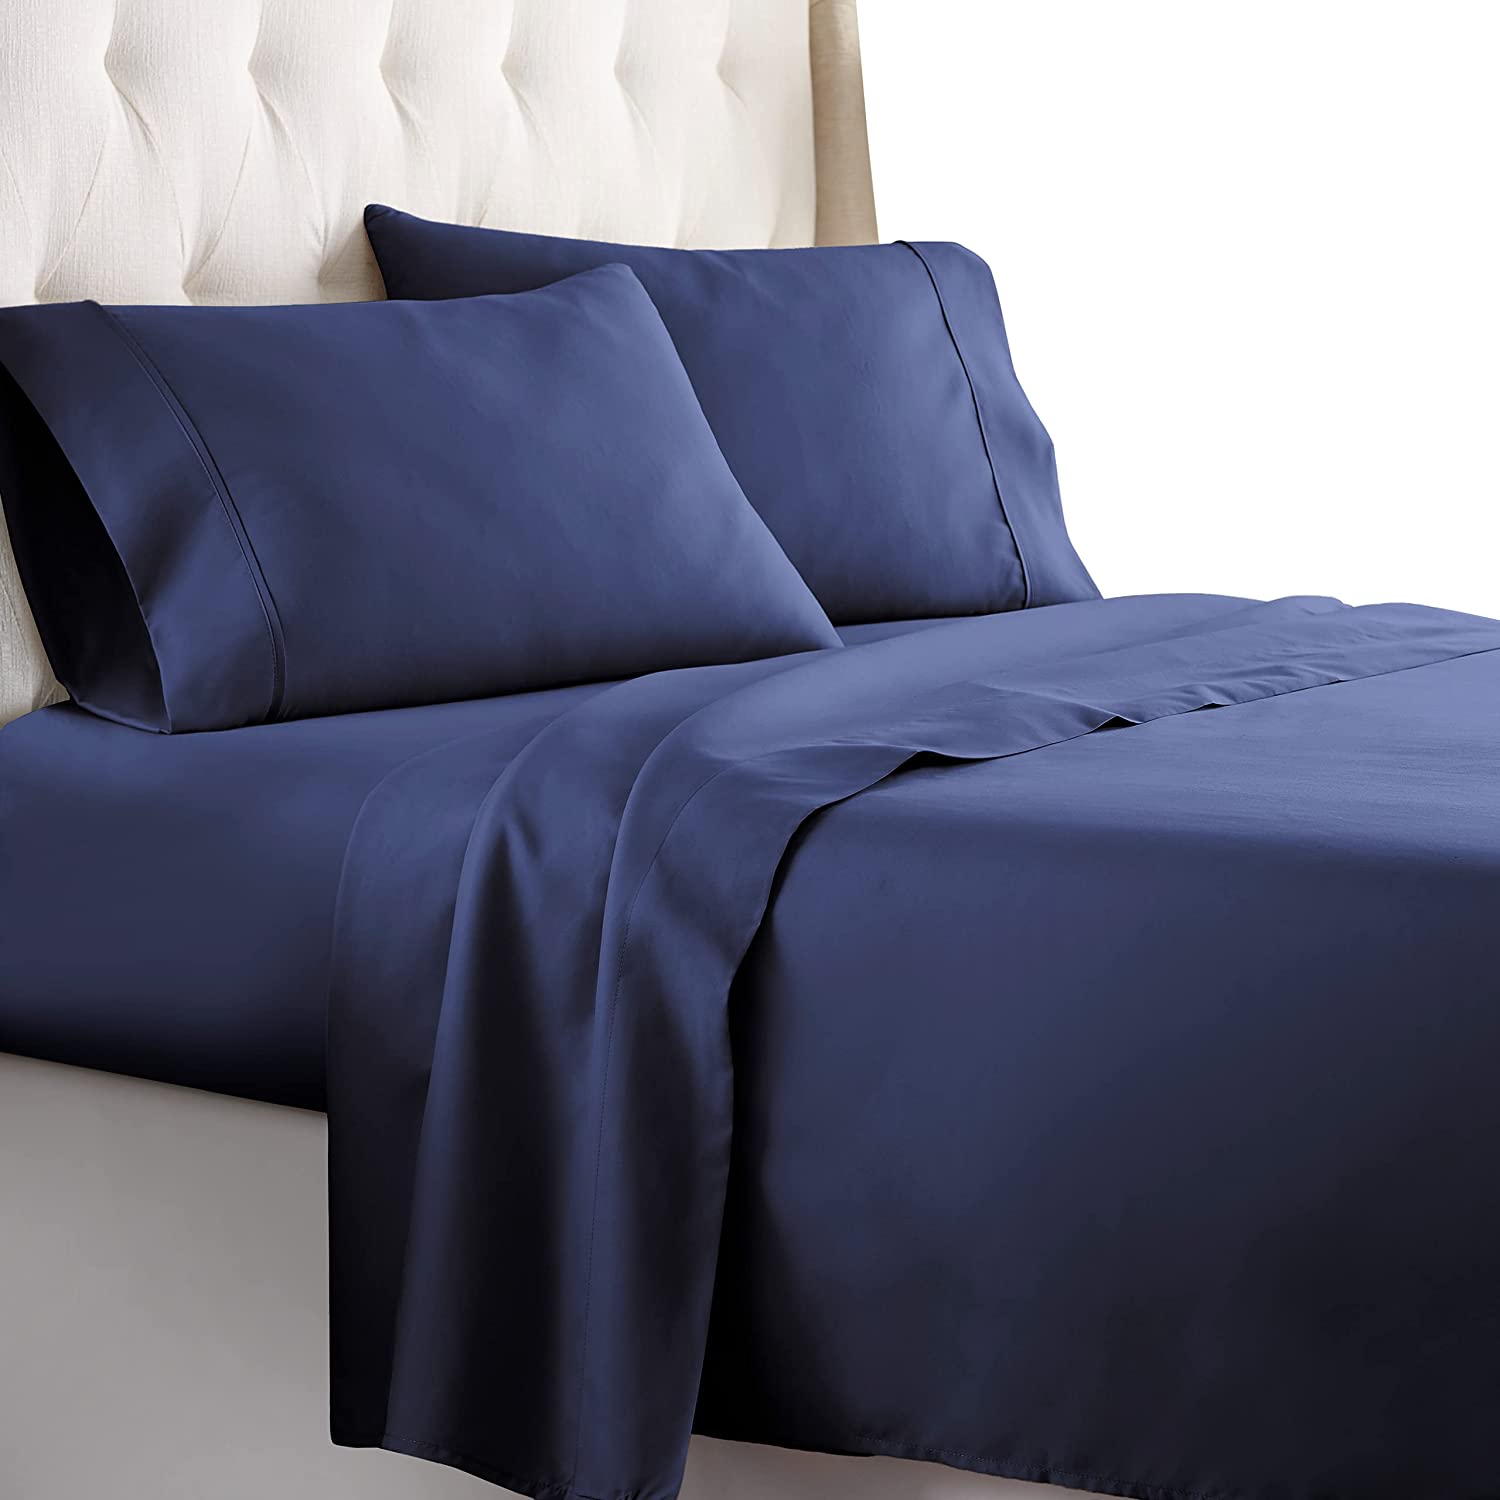 Navy Blue Sheet Set Egyptian Cotton 1000 Thread Counts at- Egyptianhomelinens.com